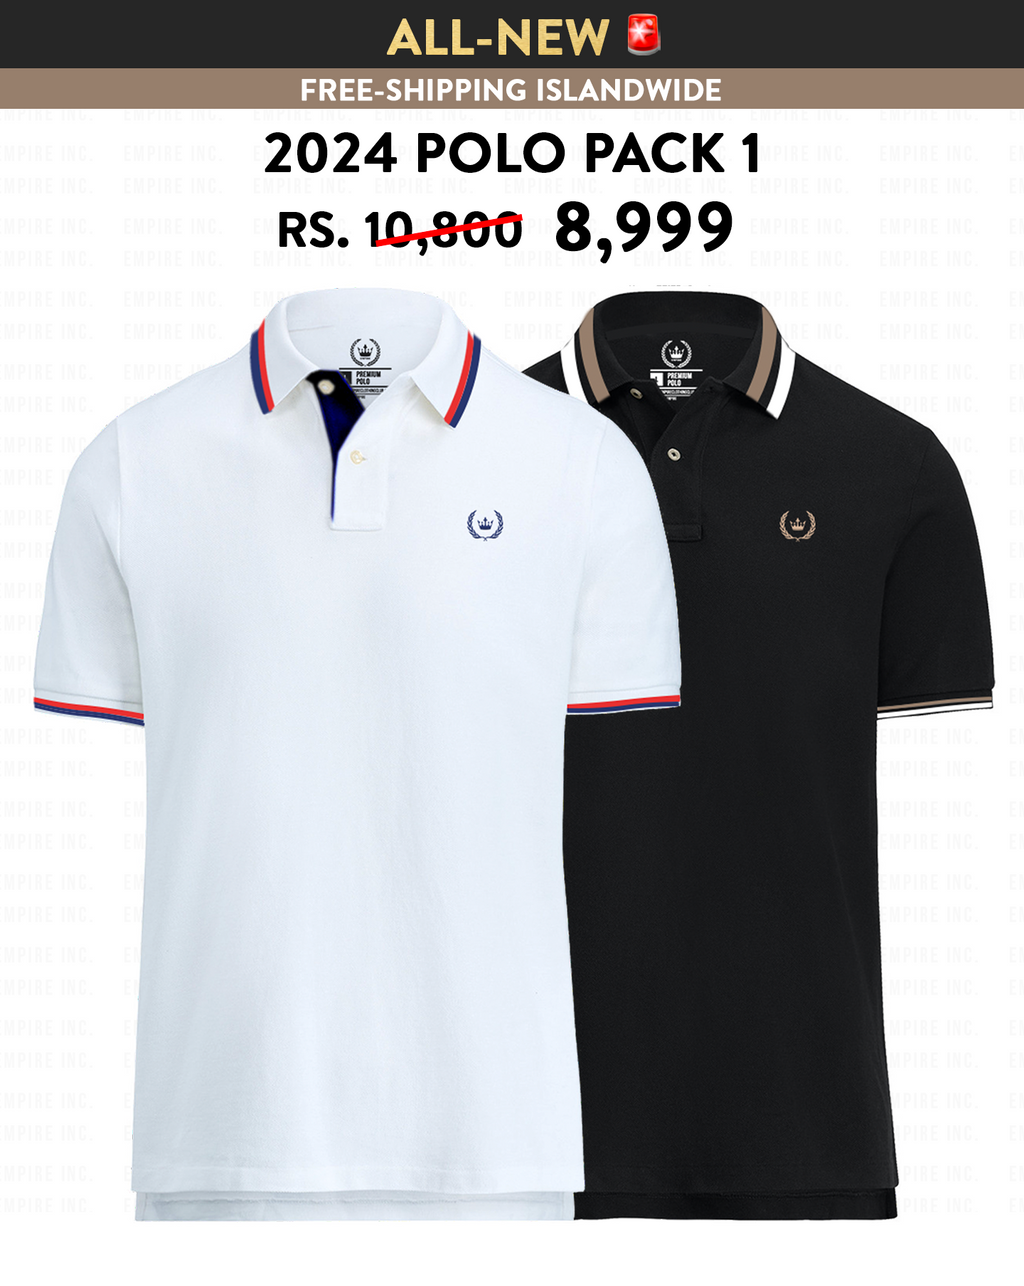 2024 Polo Two Pack 1